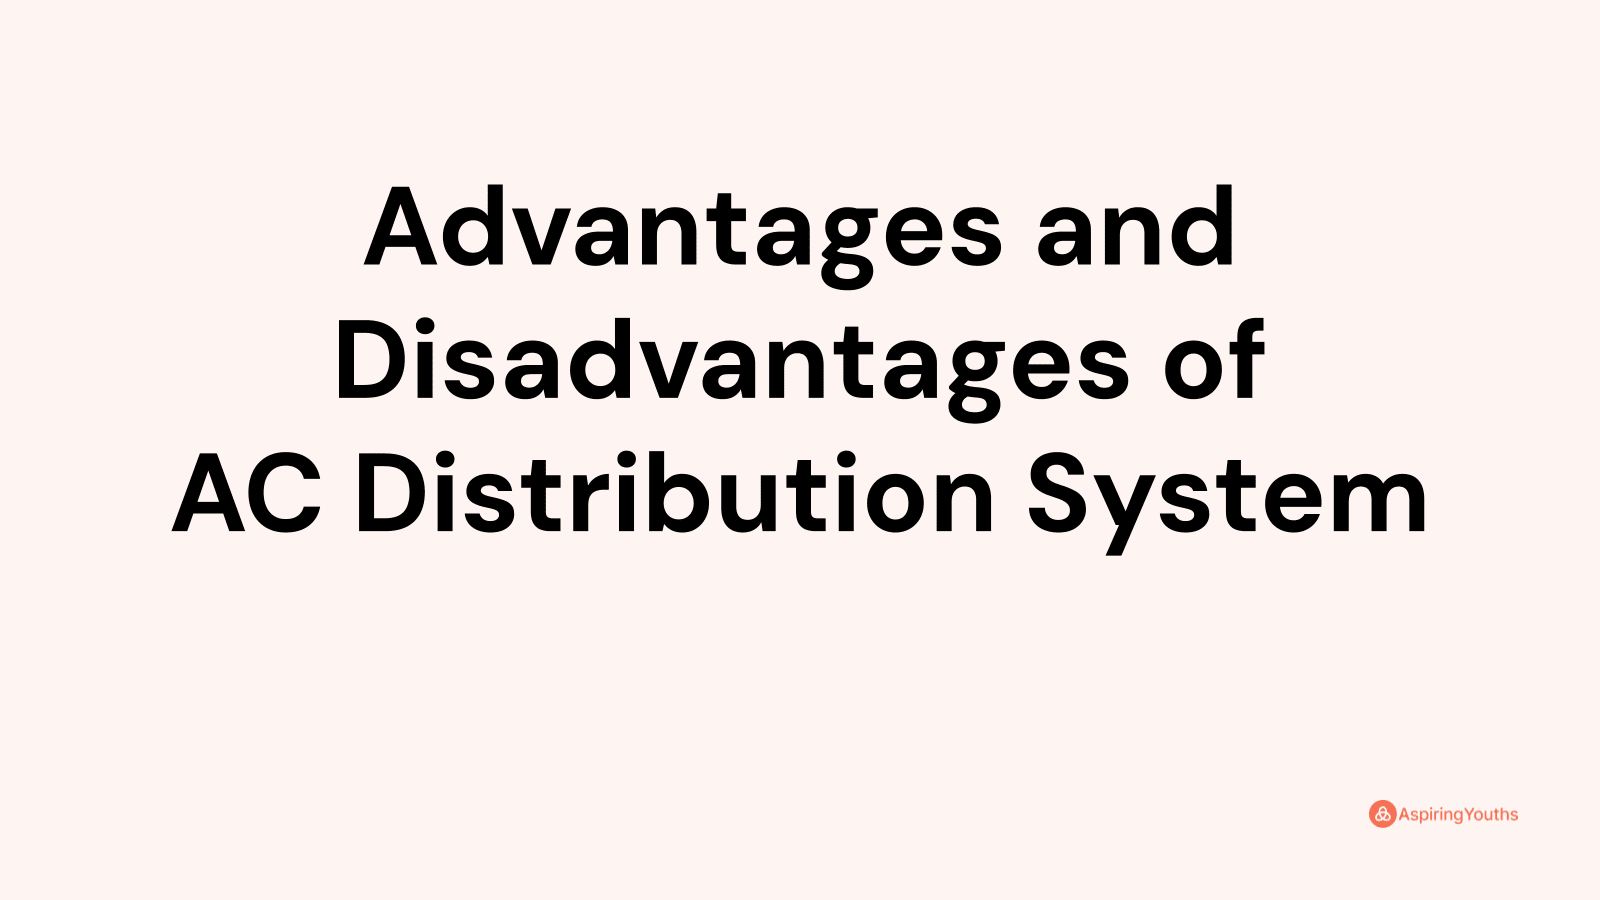 Advantages and disadvantages of AC Distribution System